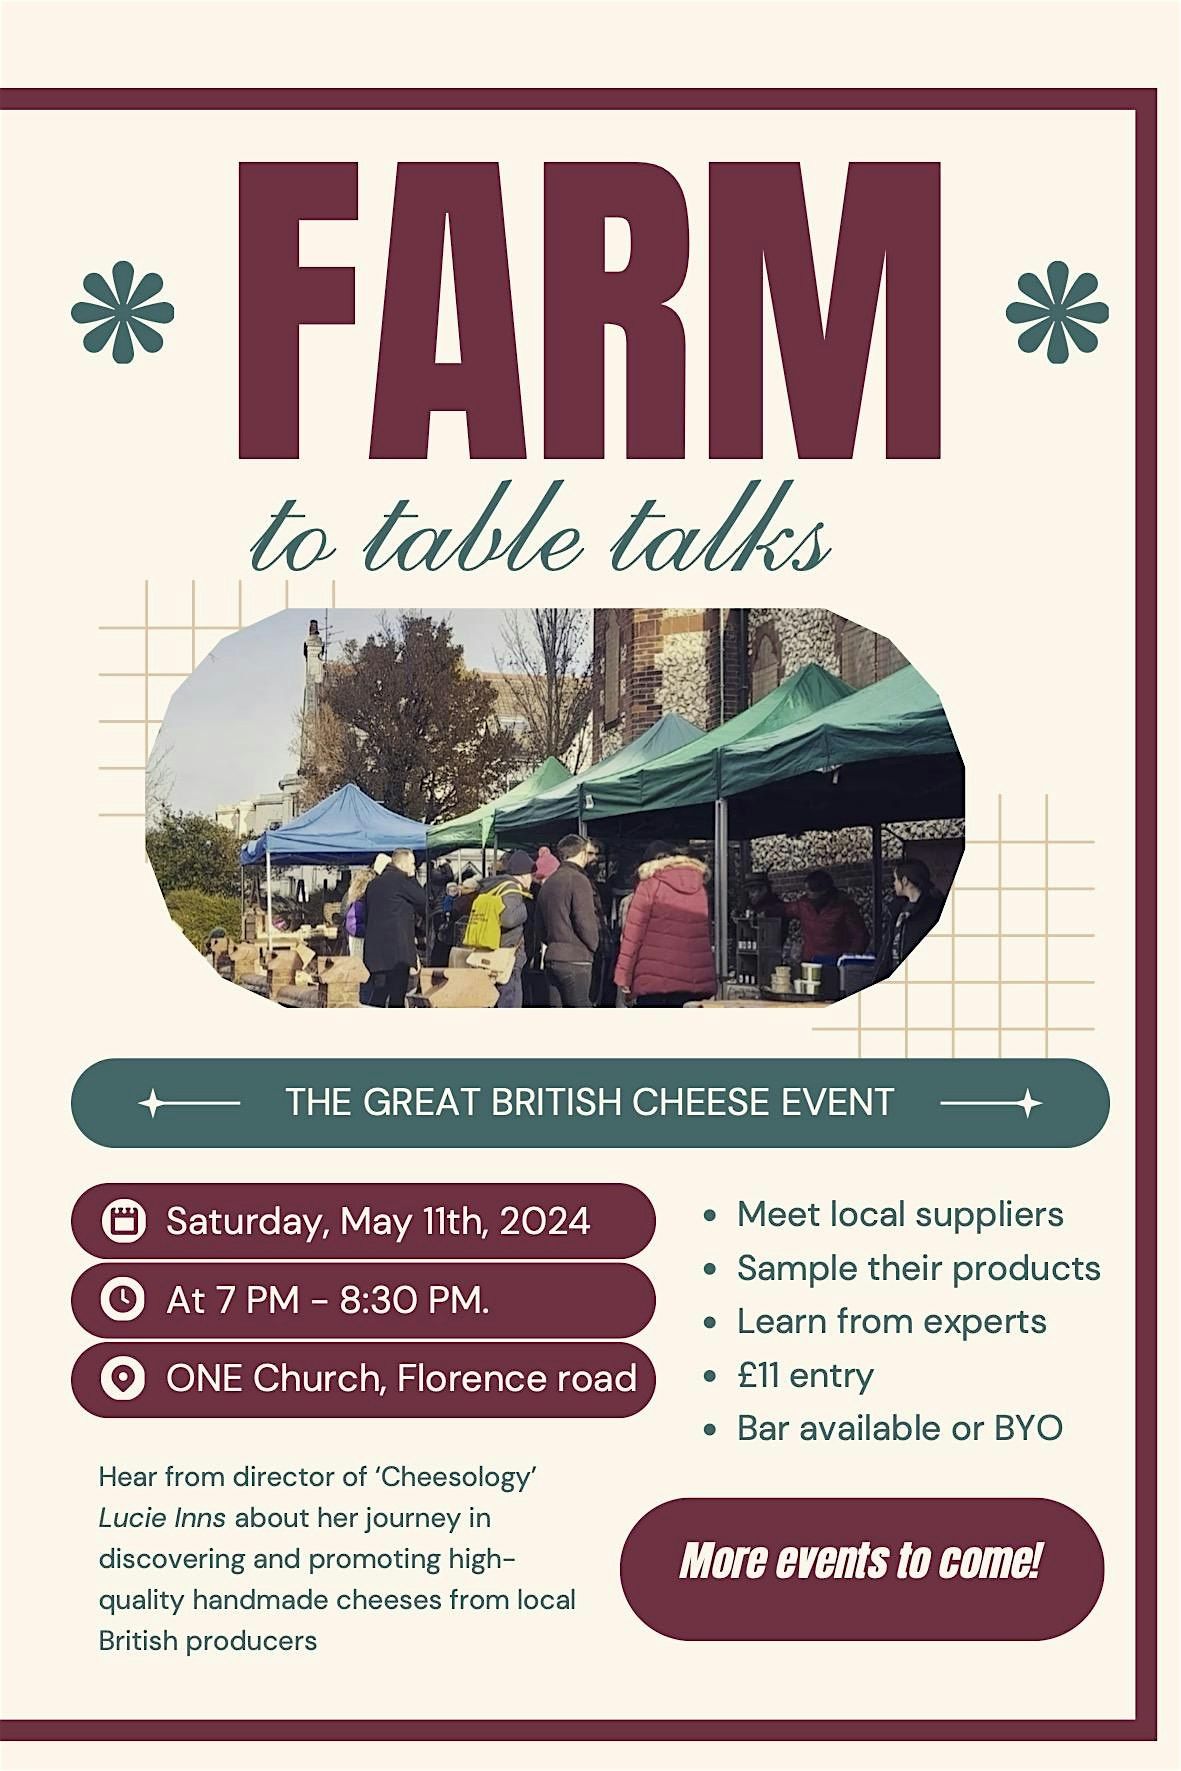 Farm to table talks - The Great British Cheese Event